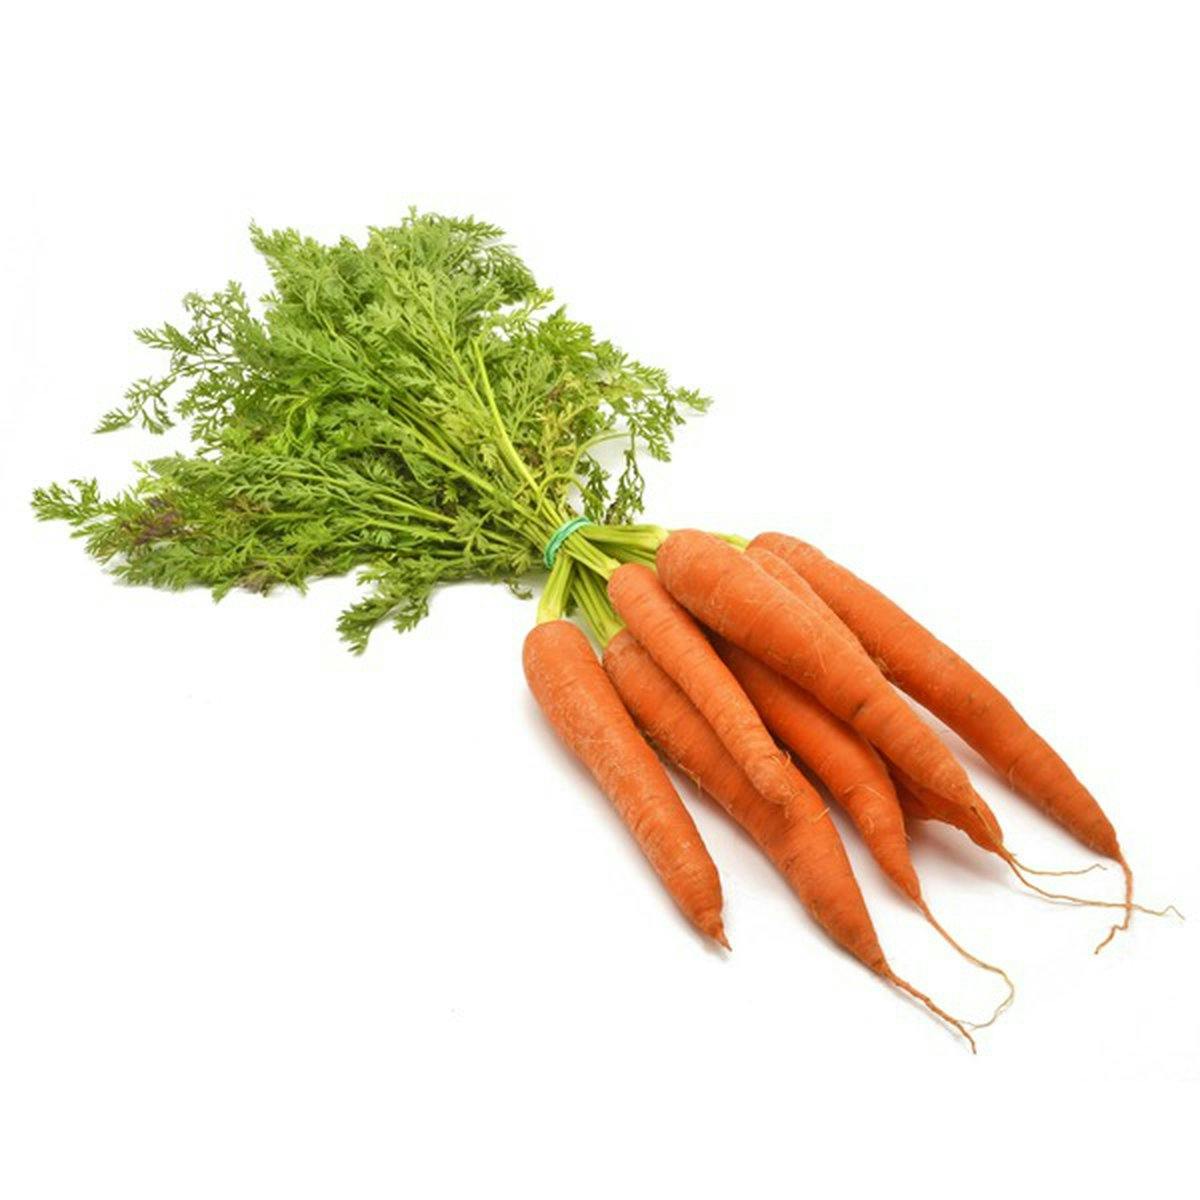 carrot or 1/2